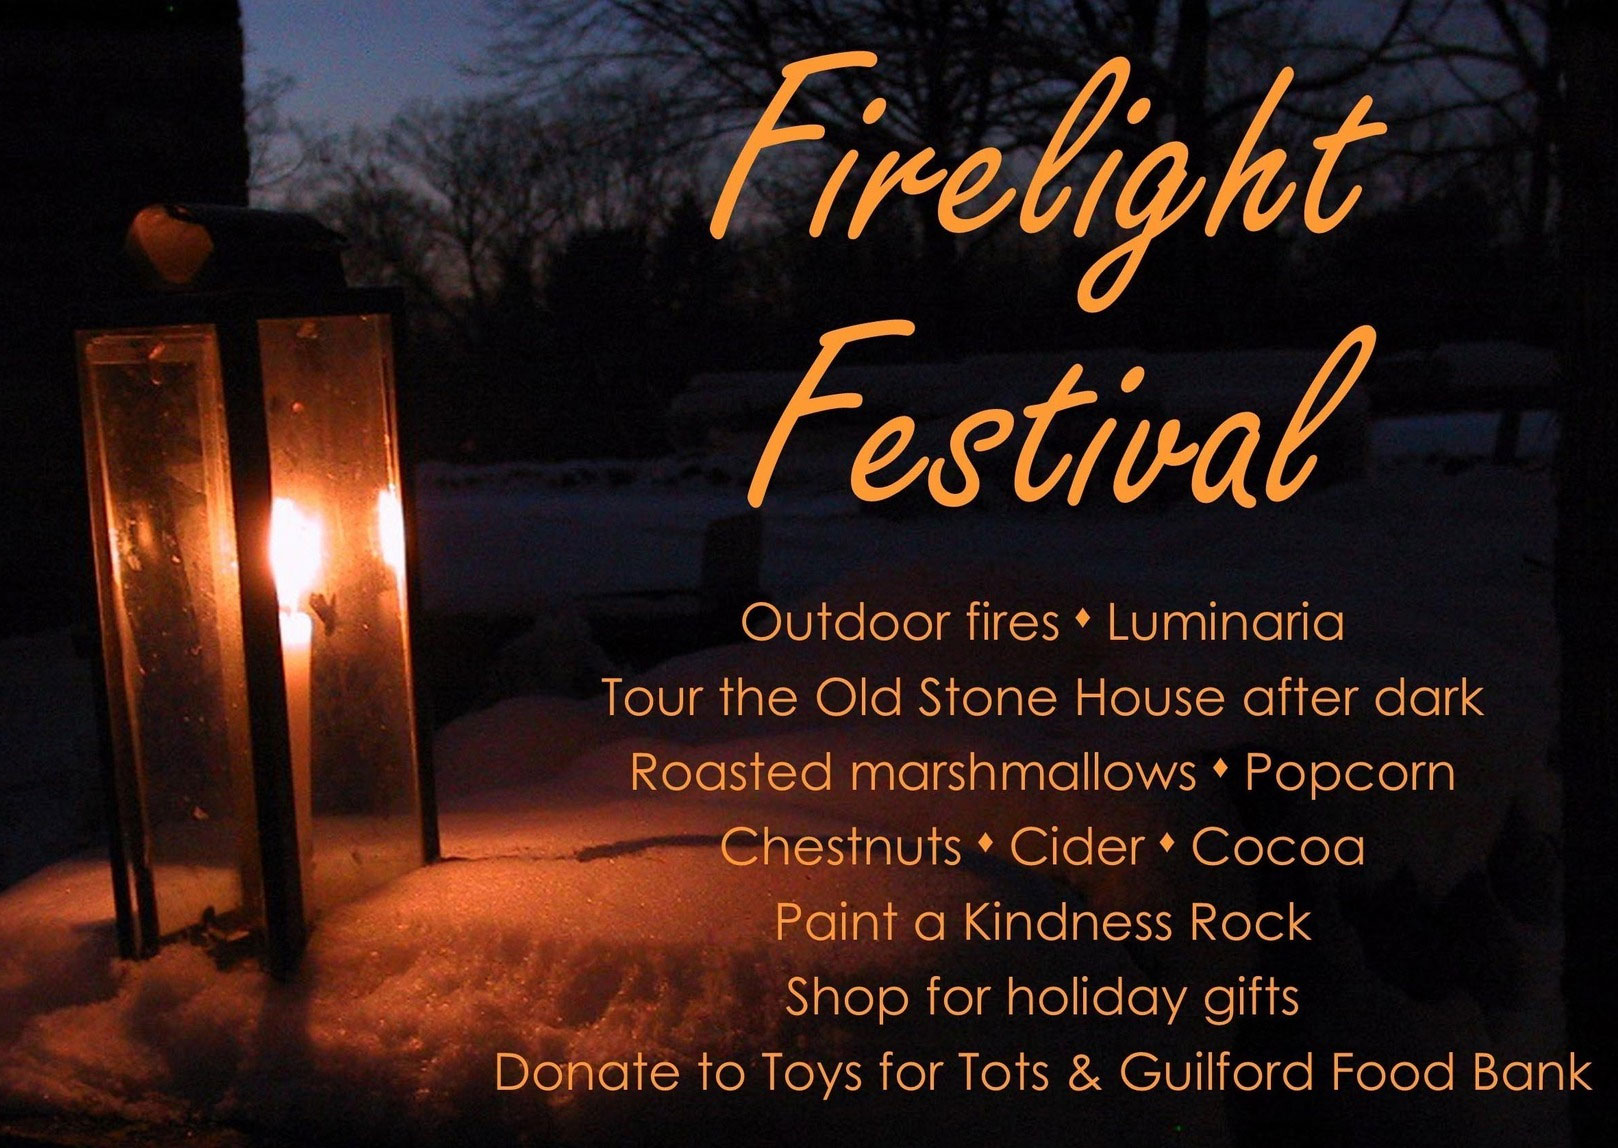 Firelight Festival at Henry Whitfield State Museum (Guilford)